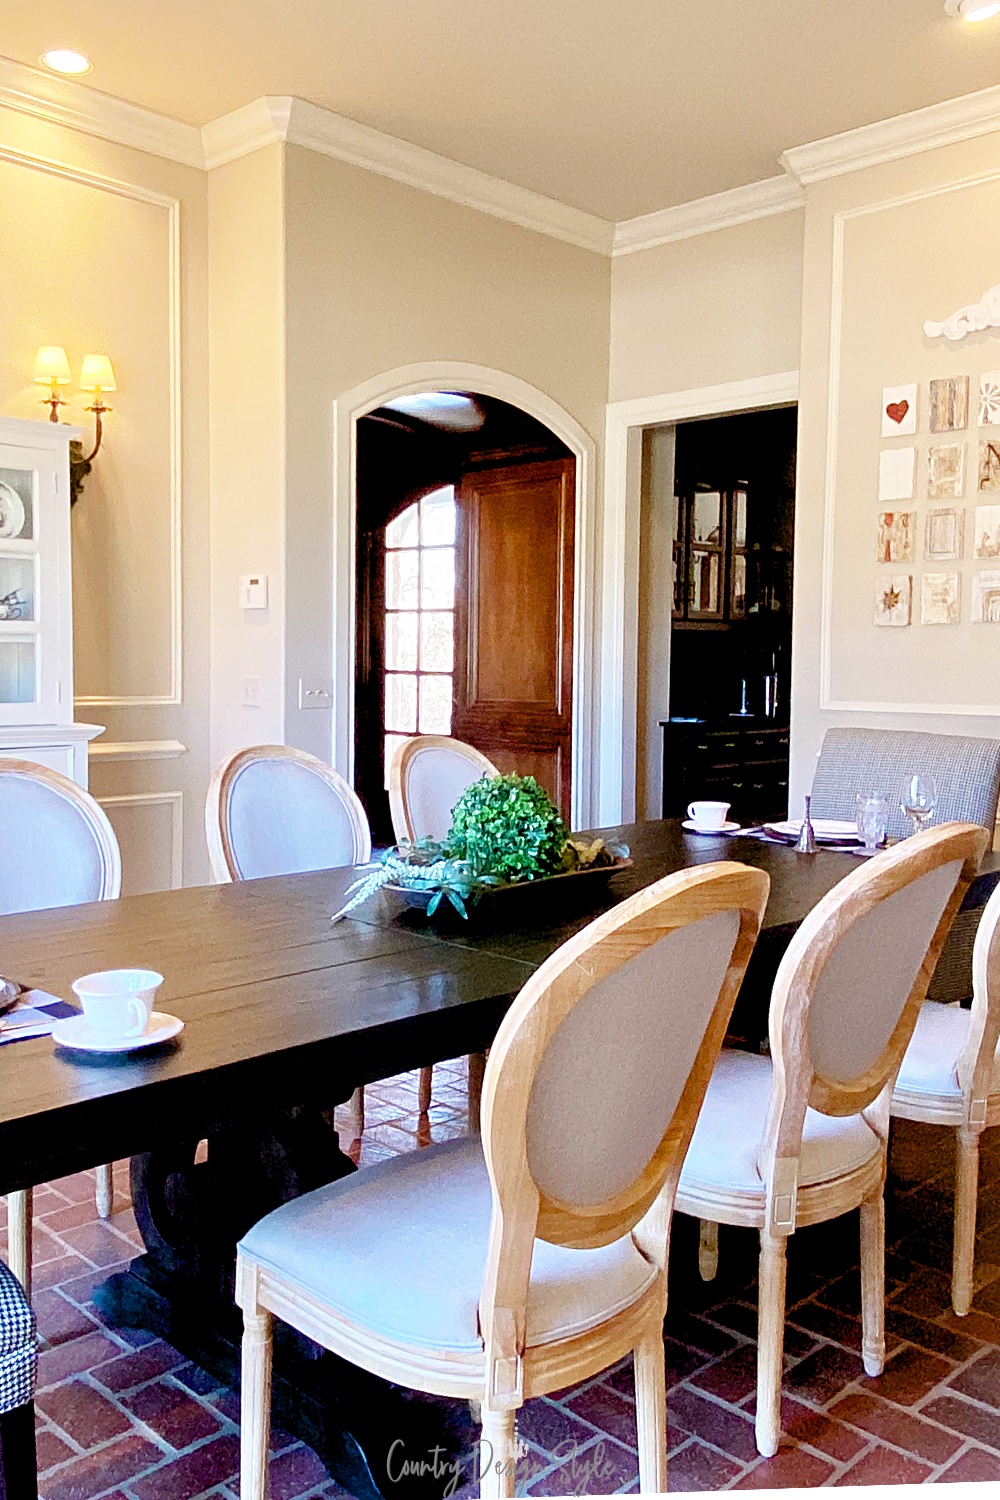 Dining room tour 2022, a glamorous and sensual peek at our new design